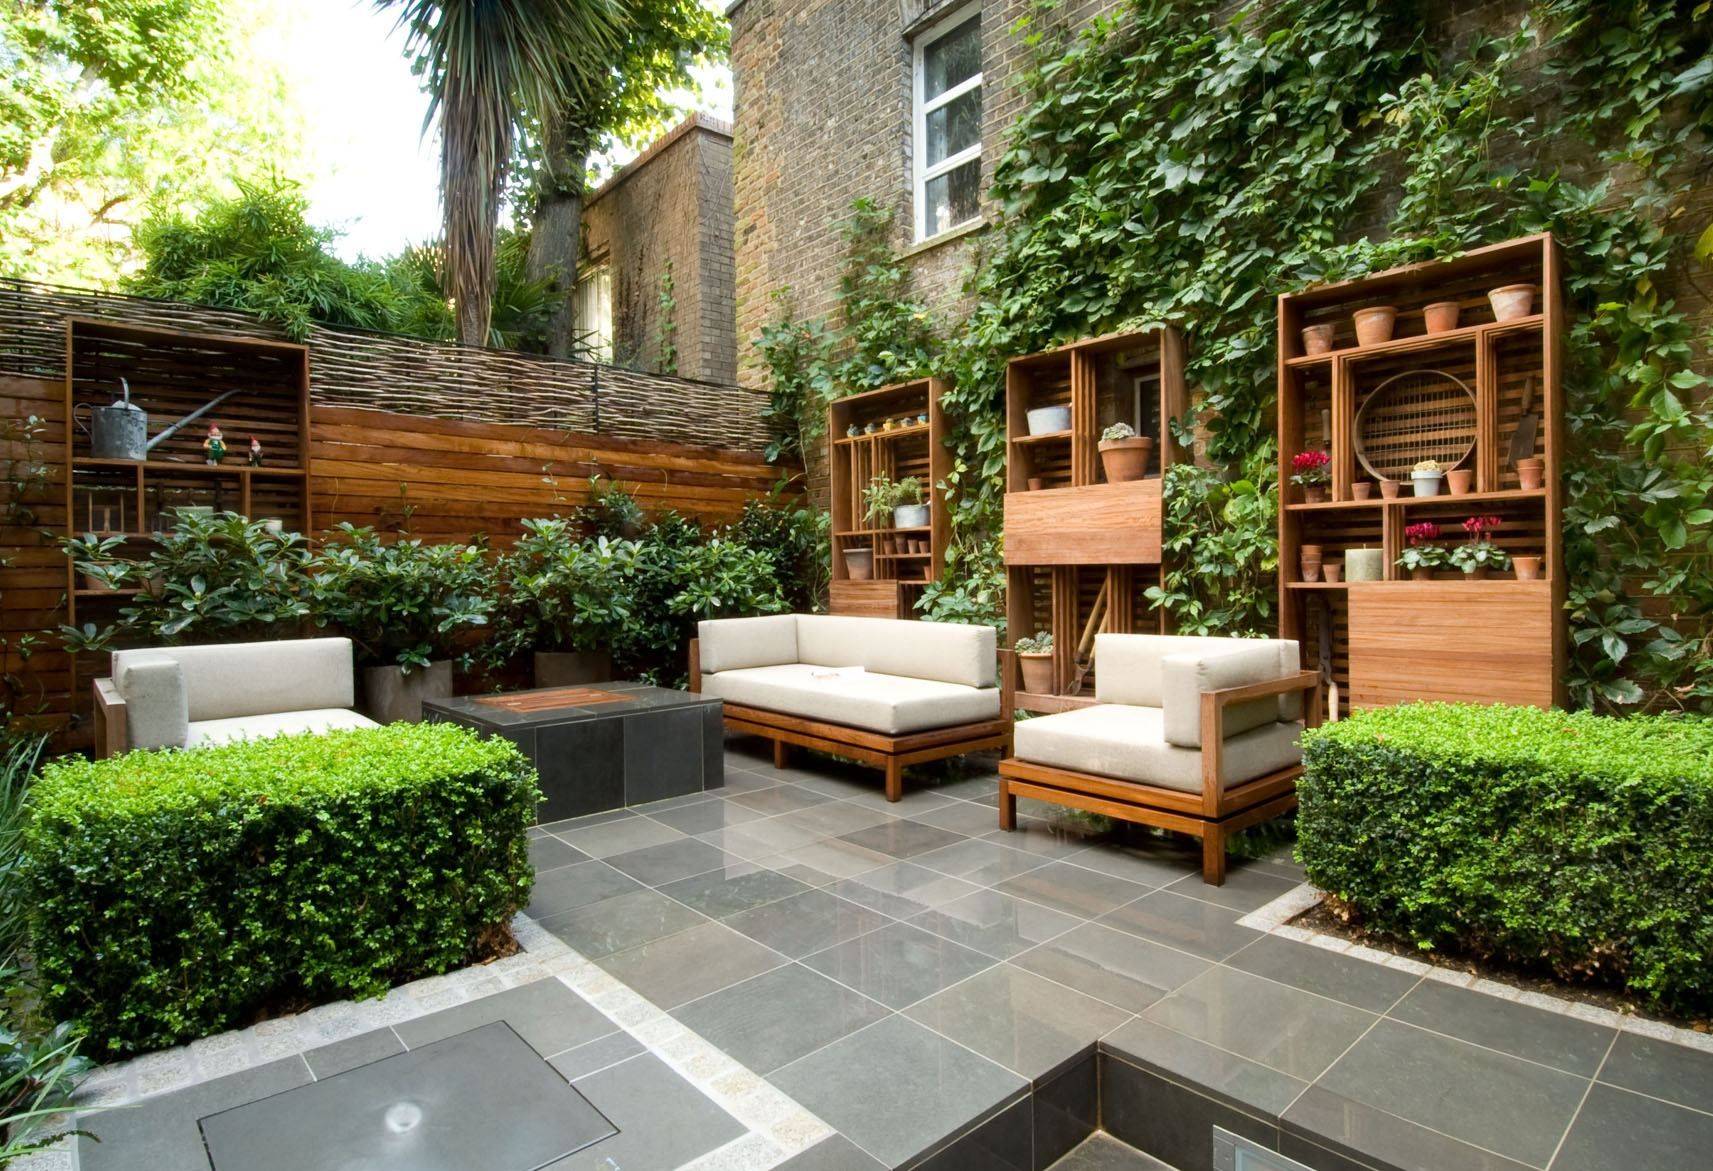 Classic Courtyards Southern Living